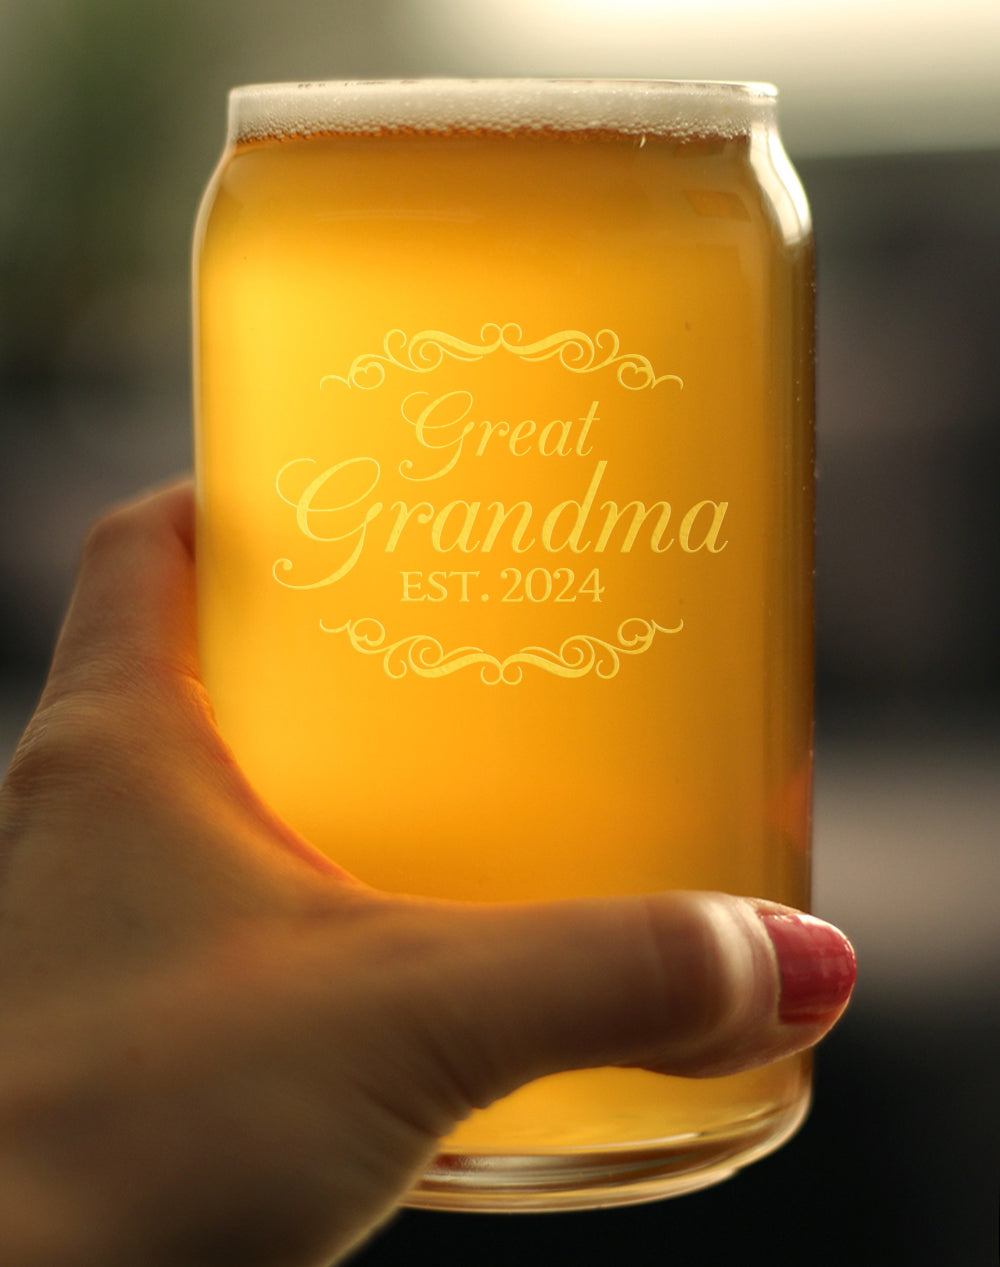 Great Grandma Est 2024 - New Great Grandmother Beer Can Pint Glass Gift for First Time Great Grandparents - Decorative 16 Oz Glasses